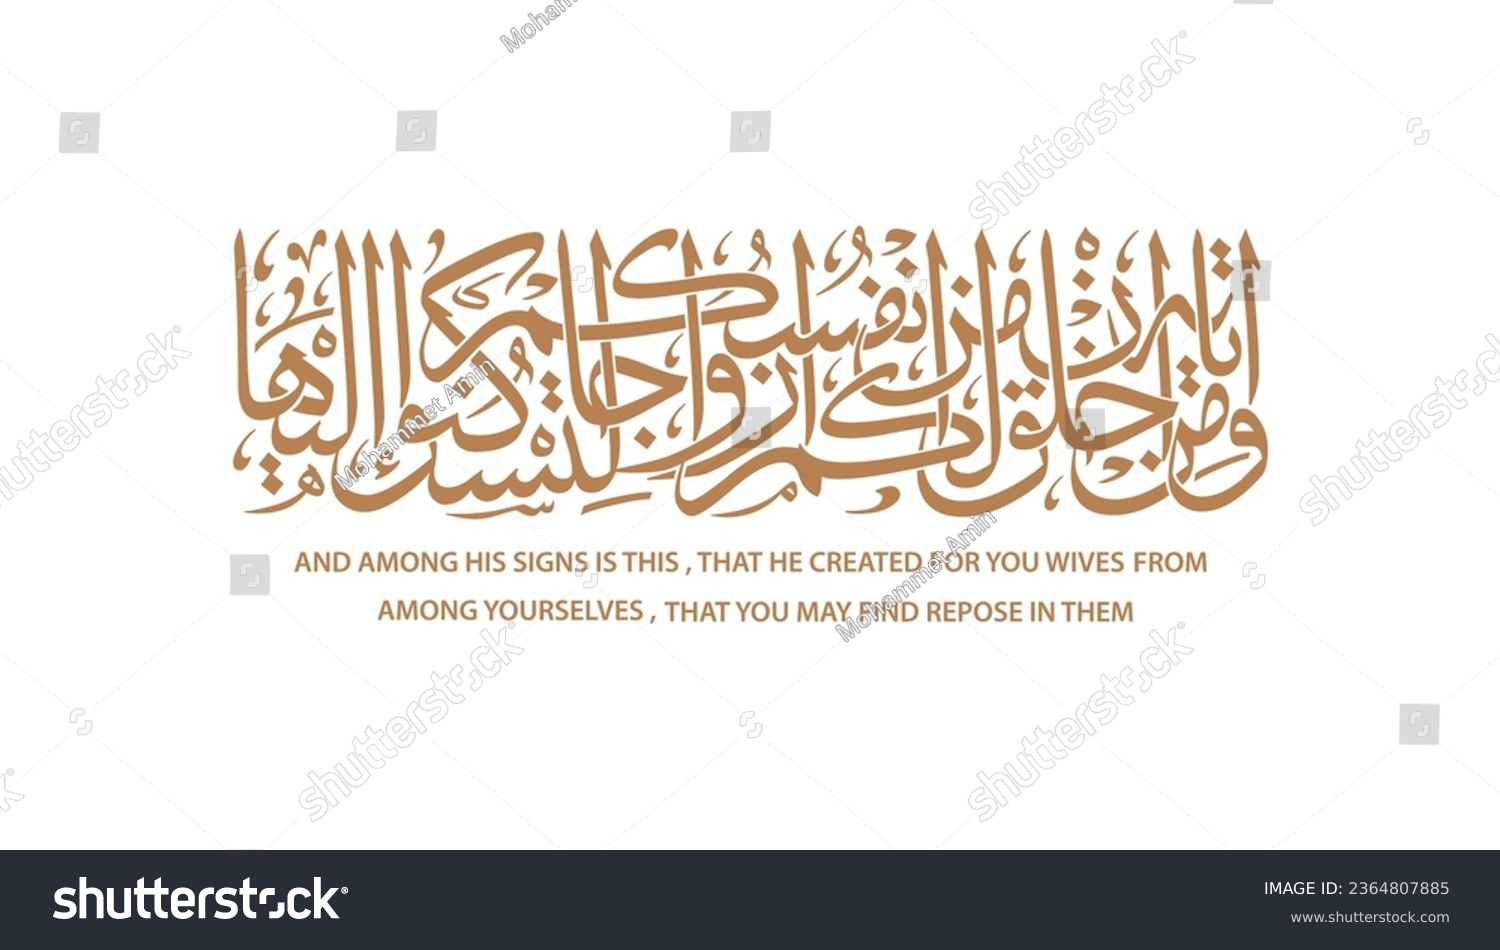 SVG of Arabic Islamic Calligraphy of verse 21 from chapter 